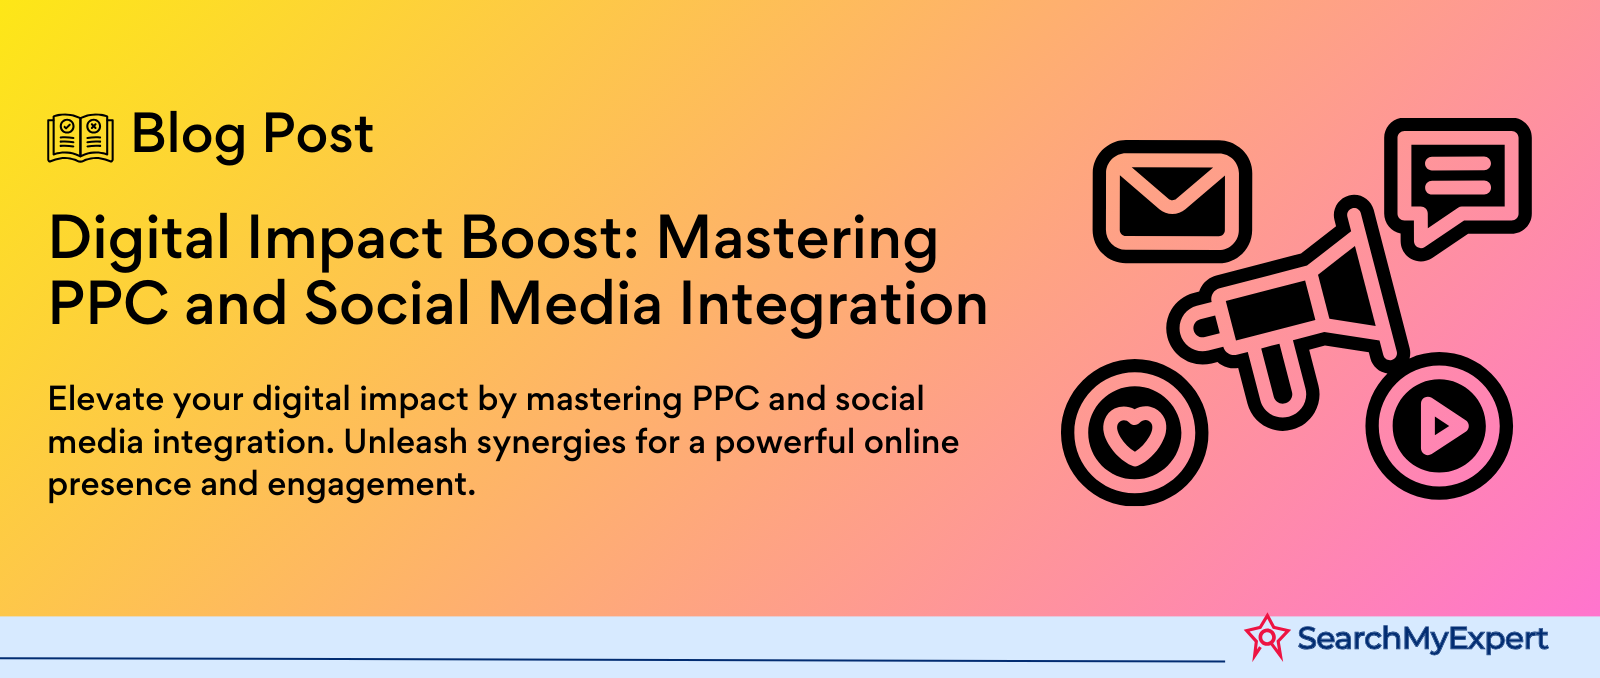 Digital Impact Boost: Mastering PPC and Social Media Integration - Search  My Expert Blog